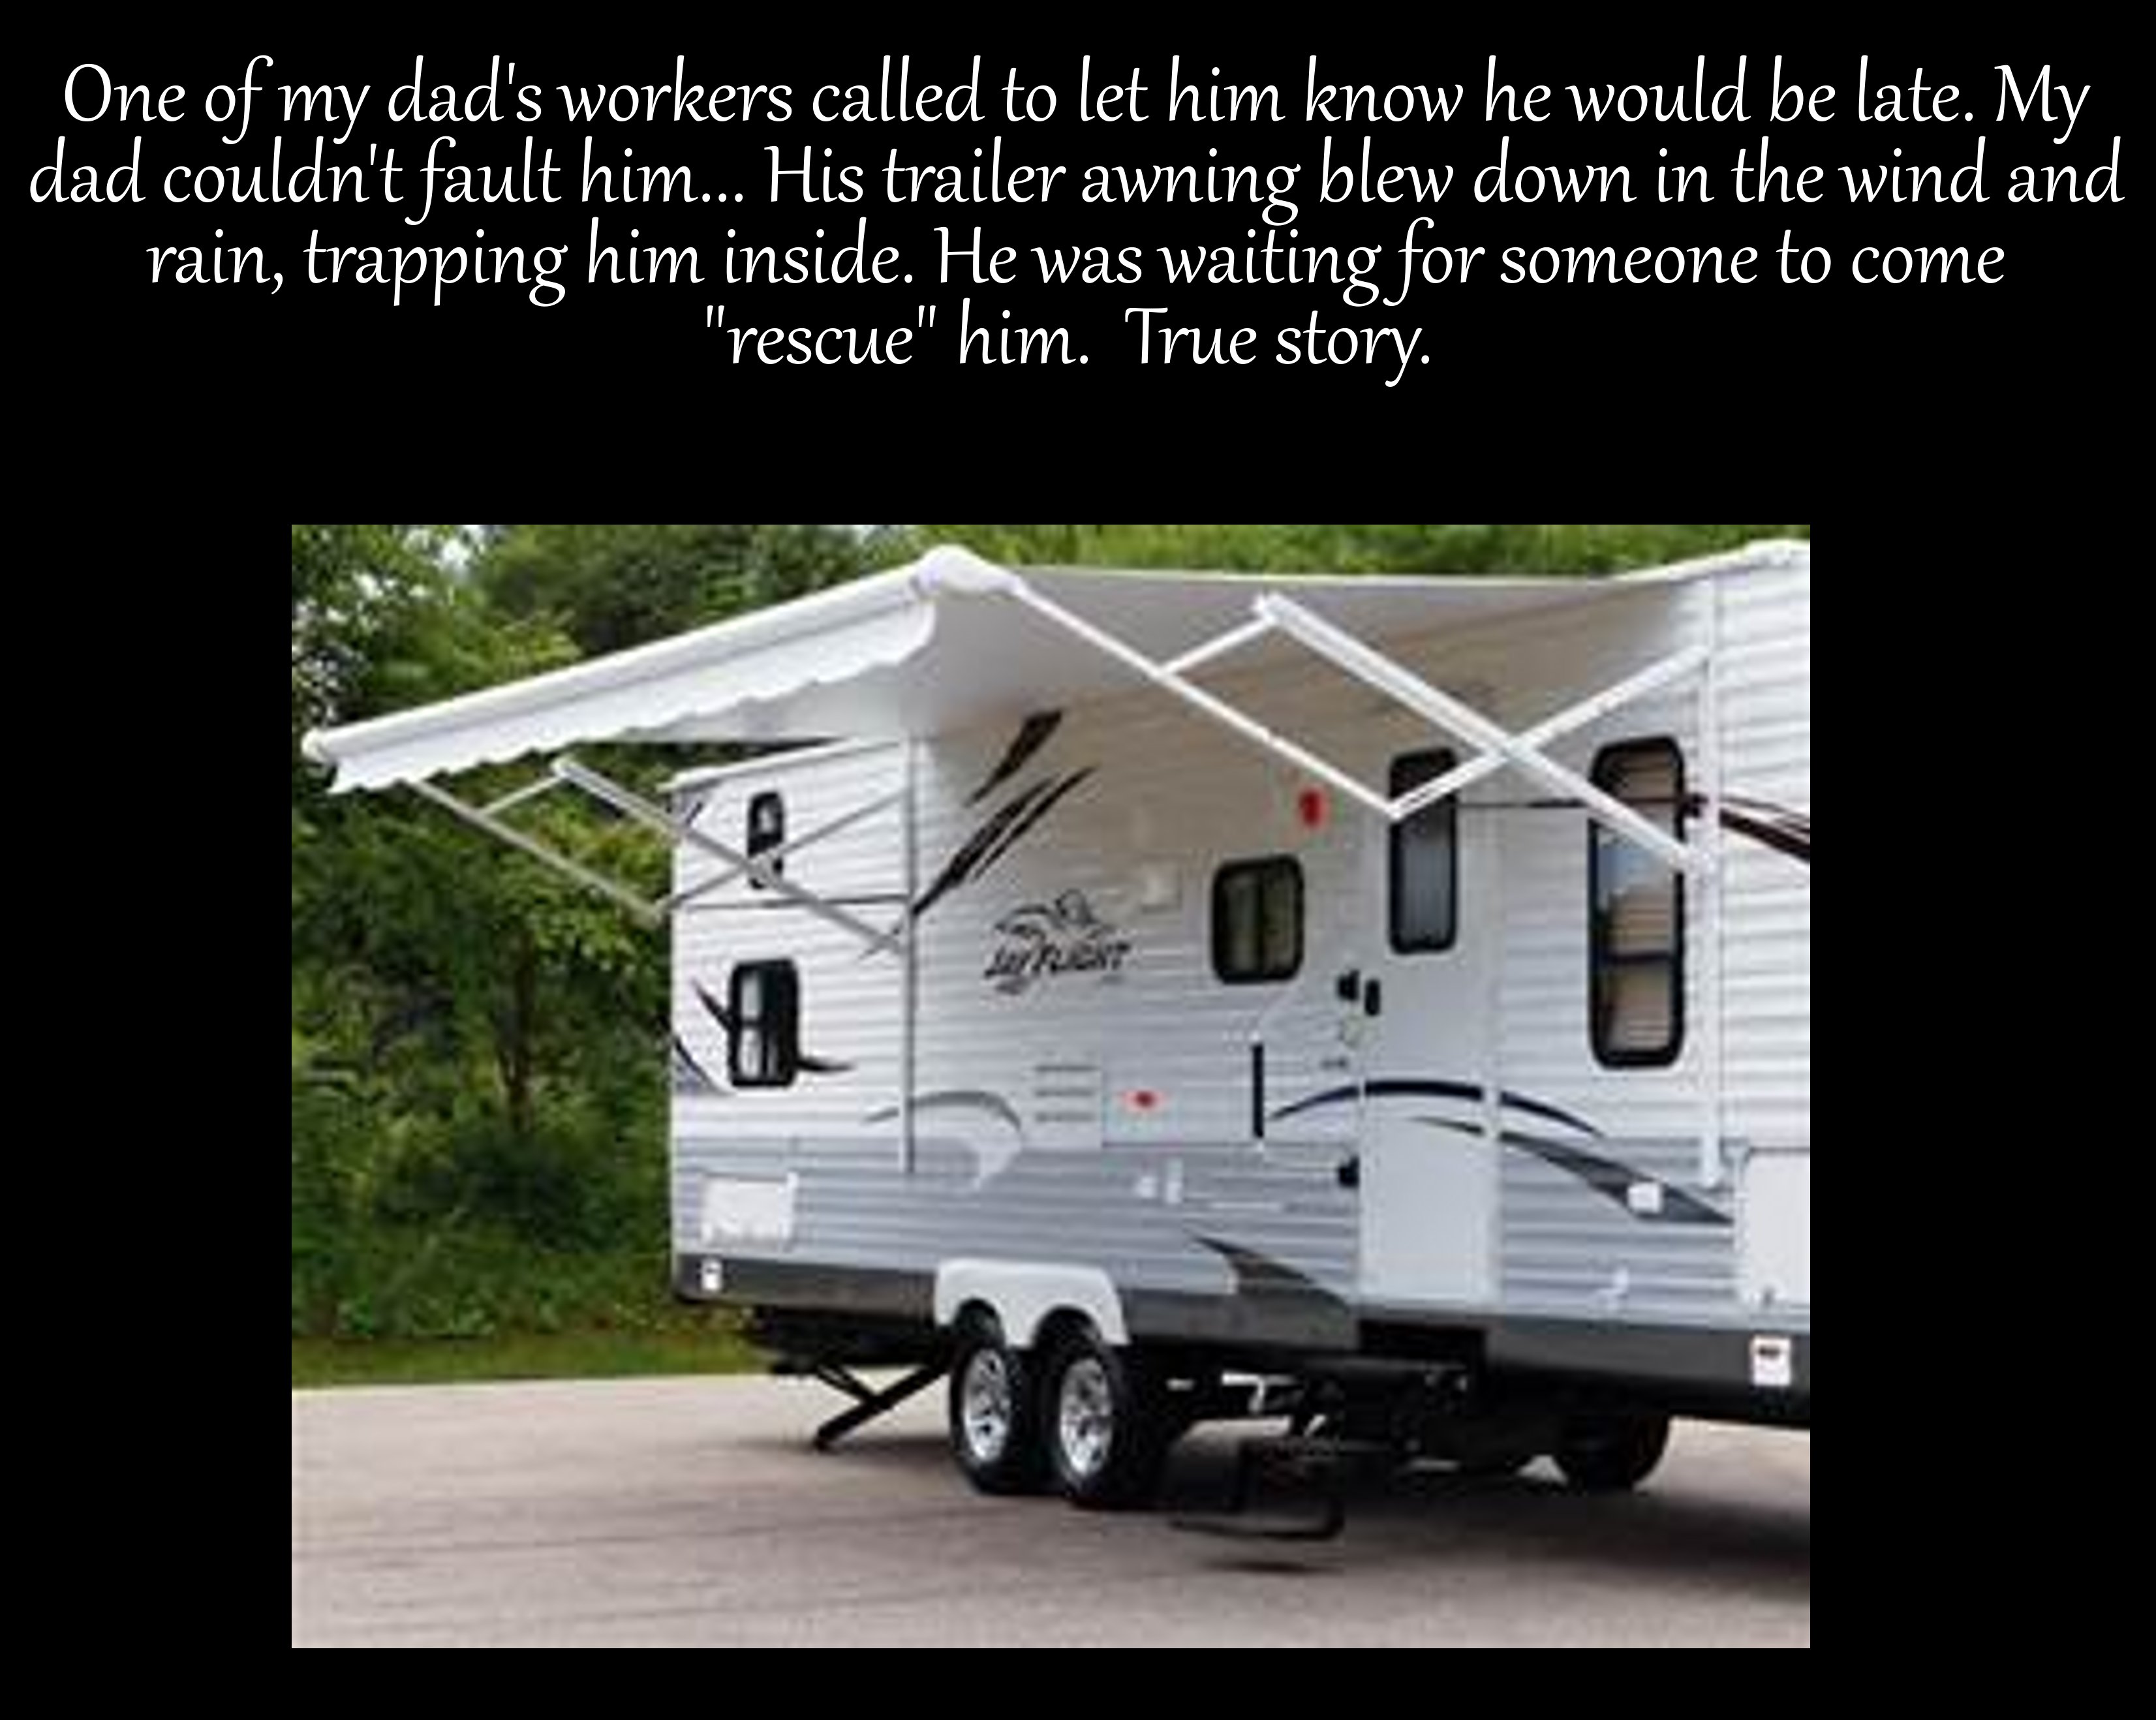 rv awning - One of my dad's workers called to let him know he would be late. My dad couldn't fault him... His trailer awning blew down in the wind and rain, trapping him inside. He was waiting for someone to come "rescue" him. True story.